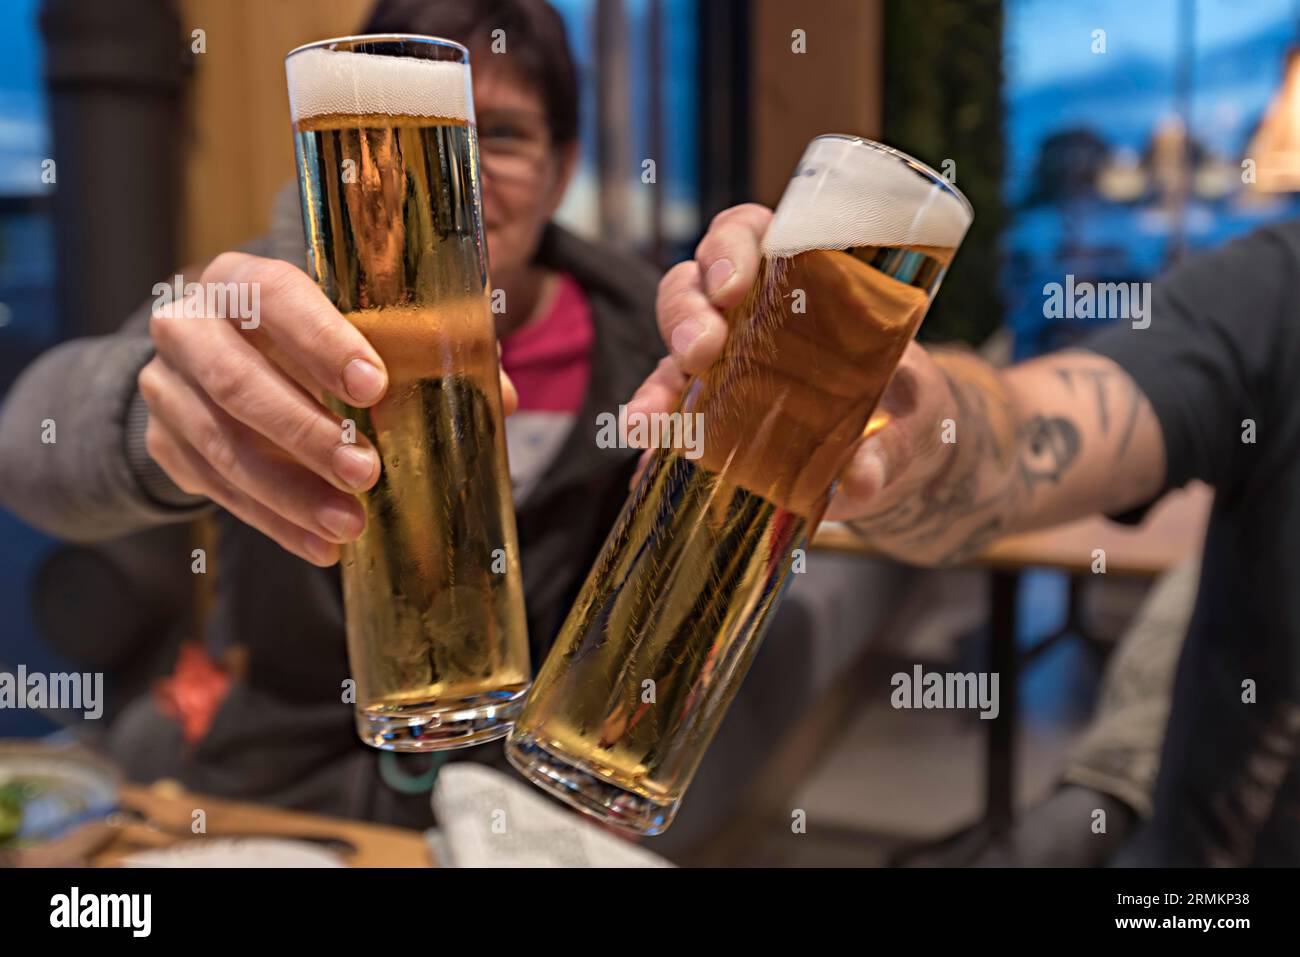 Cheers with beer glasses, Bavaria, Germany Stock Photo